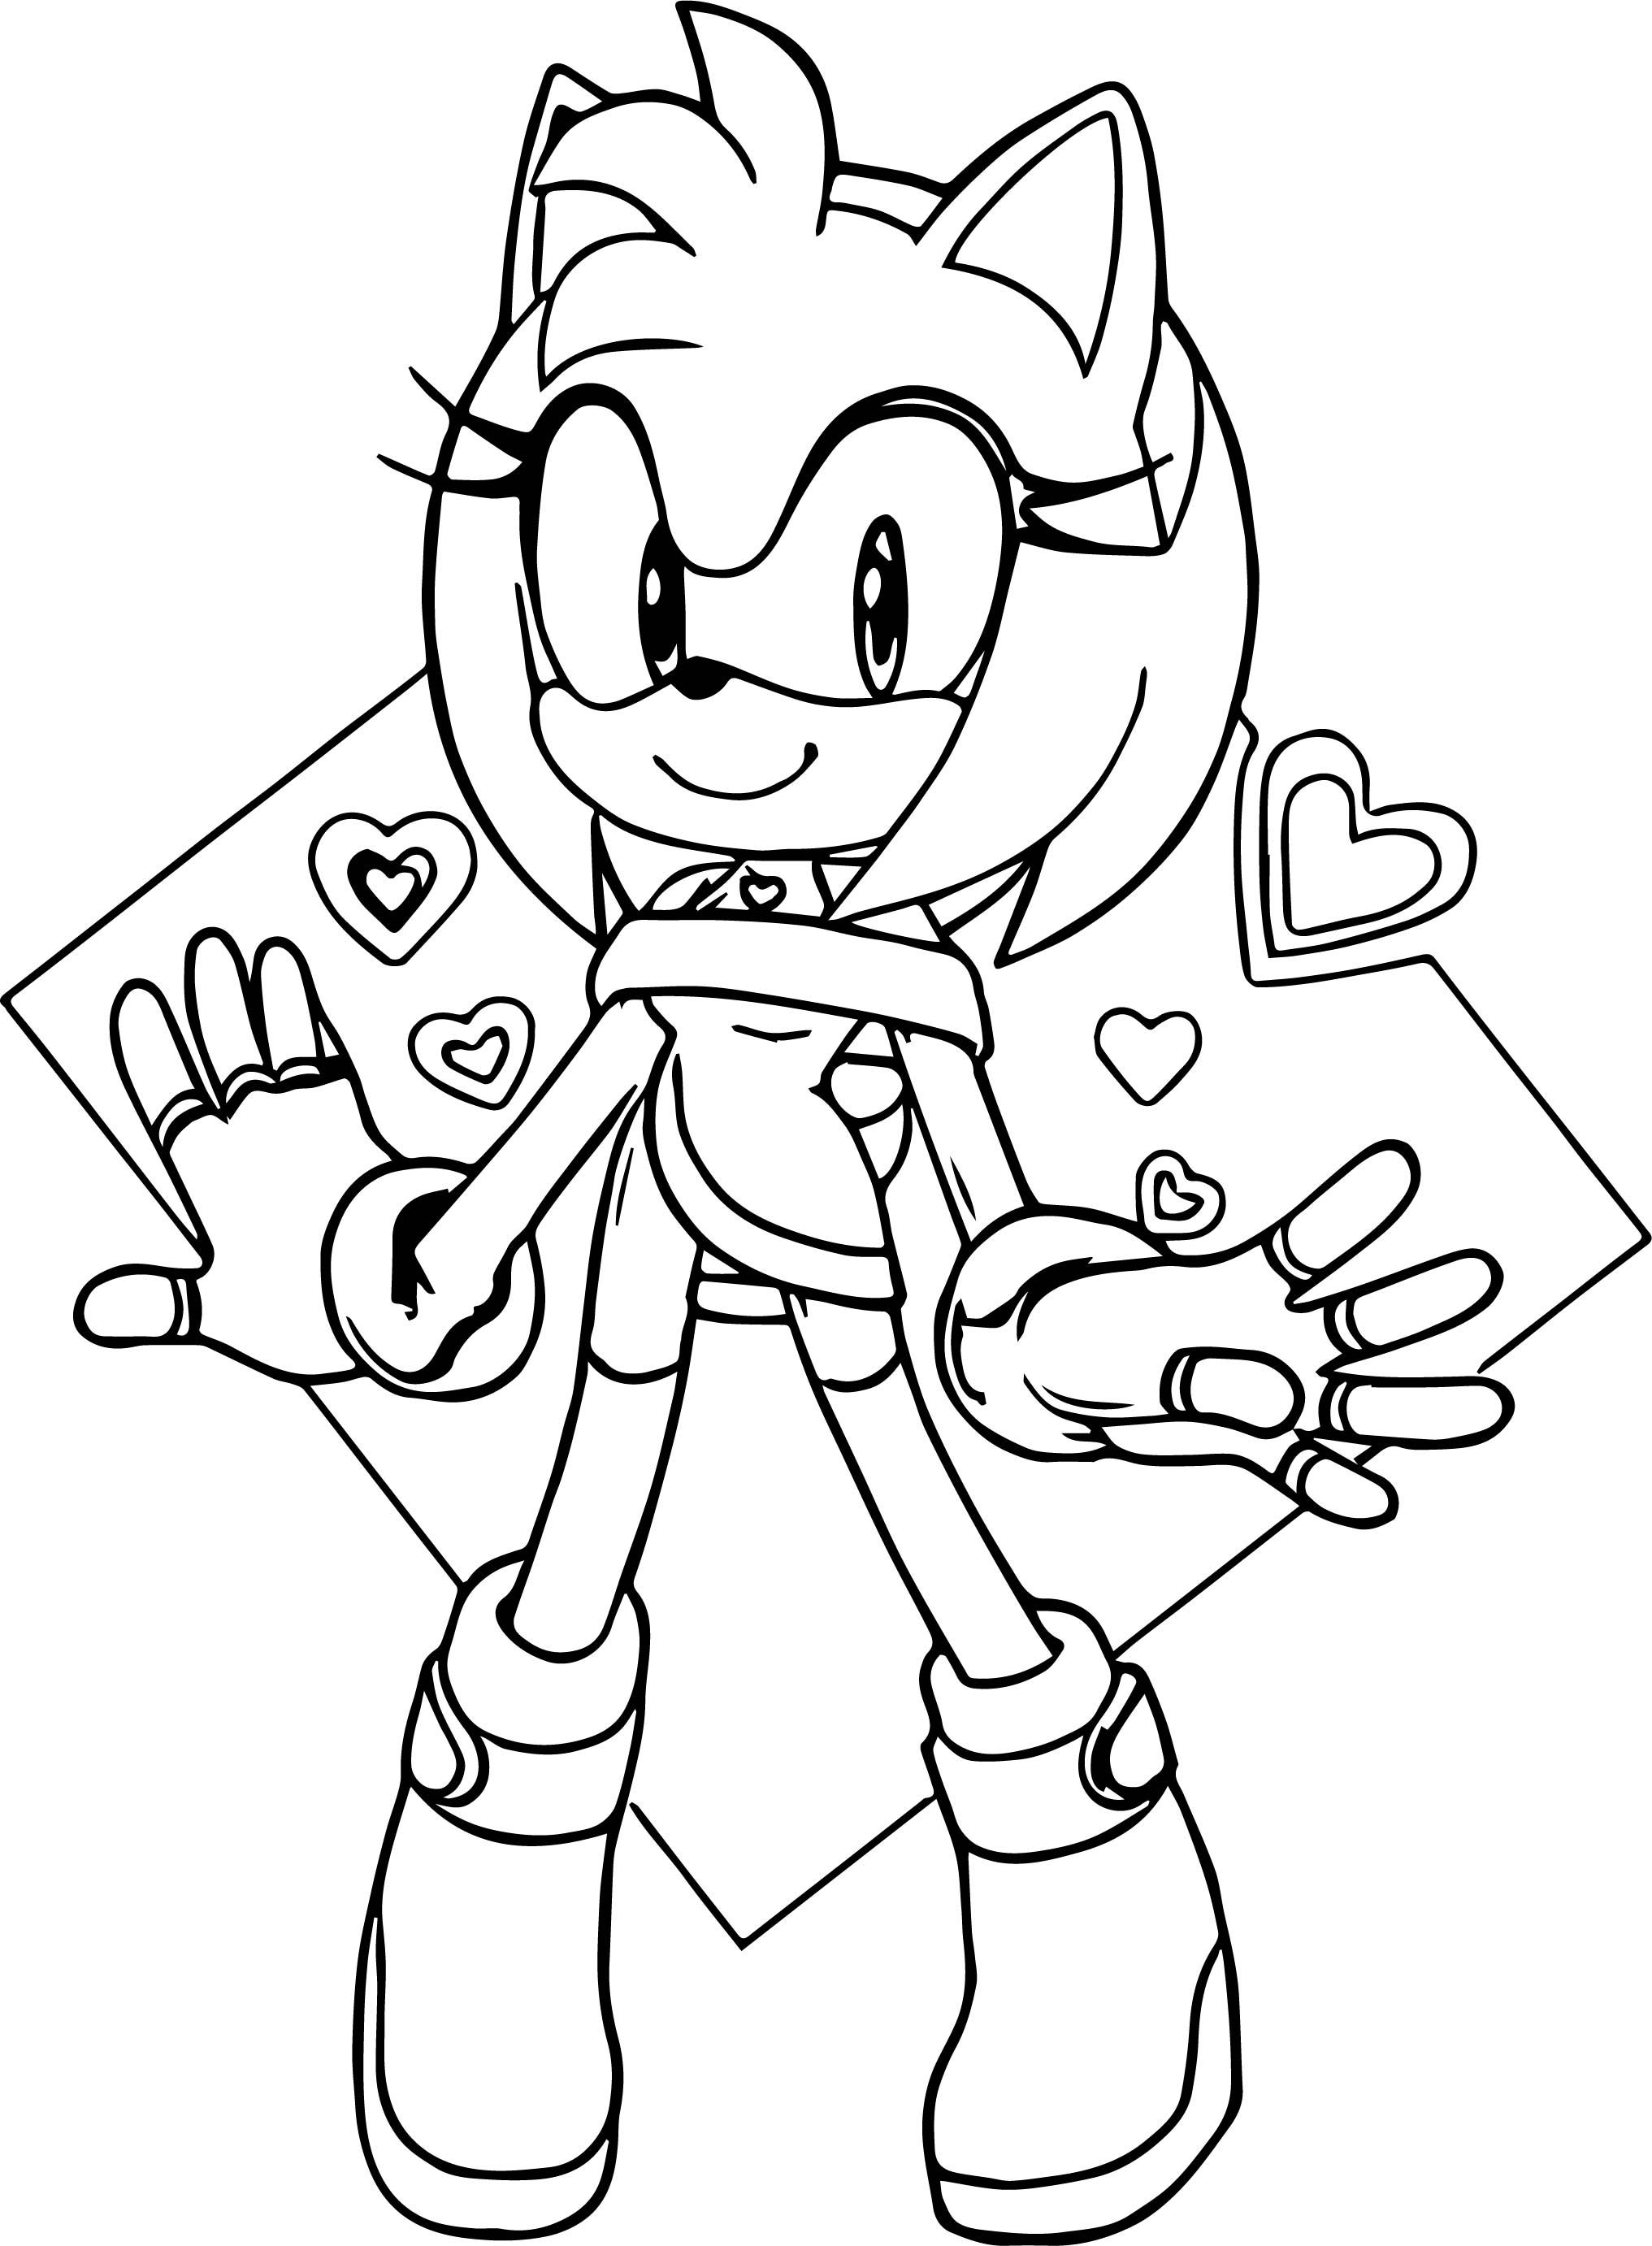 Amy Rose with a Piko Piko Hammer coloring pages, Sonic the Hedgehog  coloring pages 